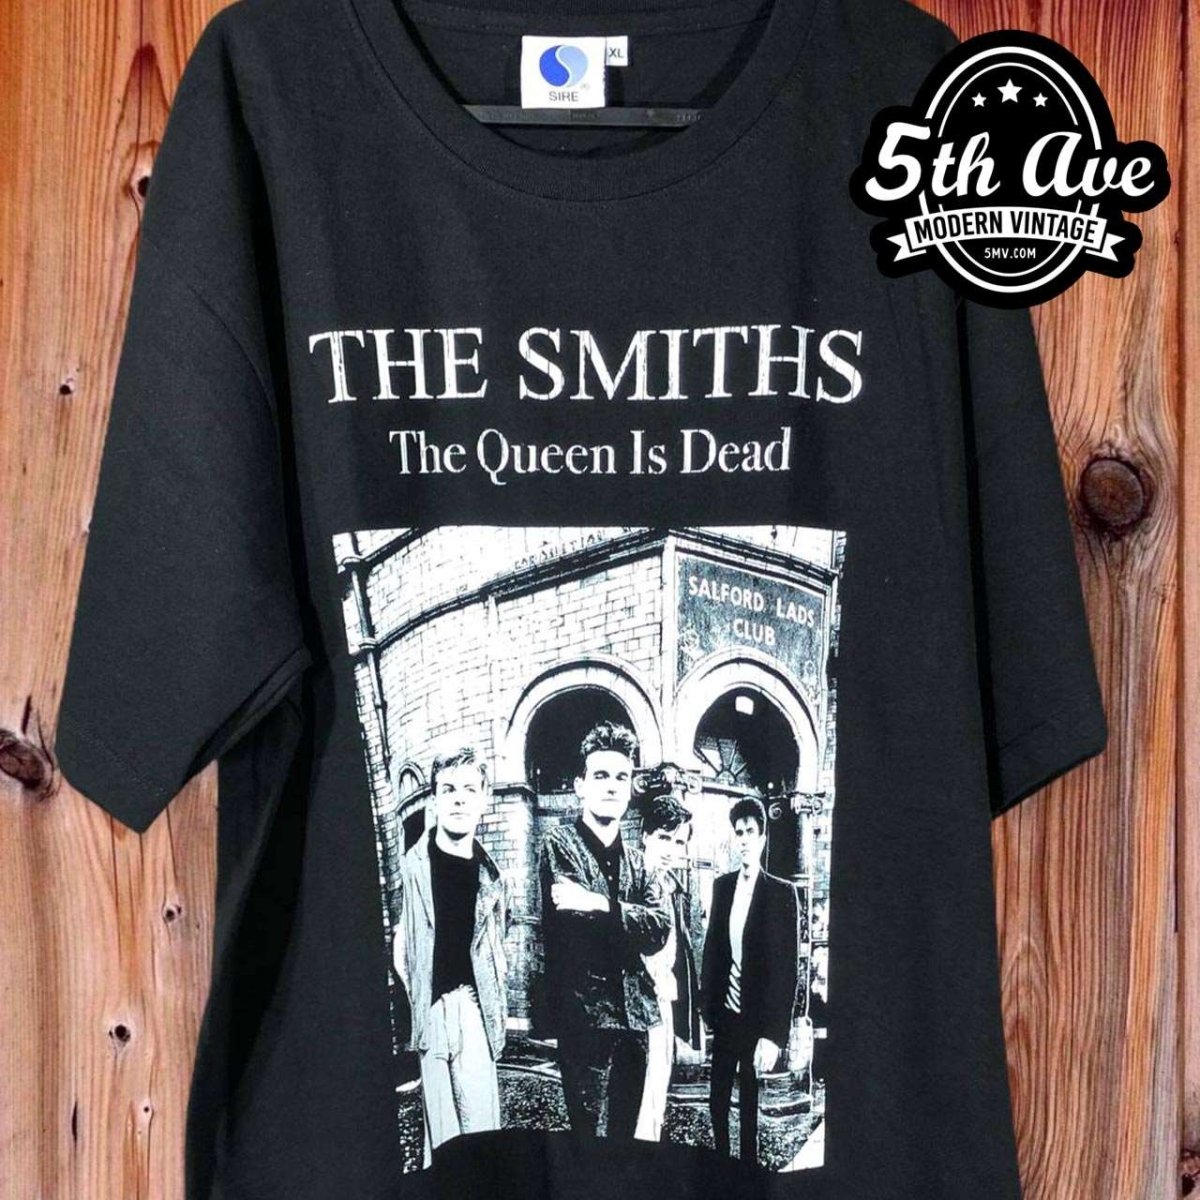 The Smiths The Queen Is Dead - New Vintage Band T shirt - Vintage Band ...